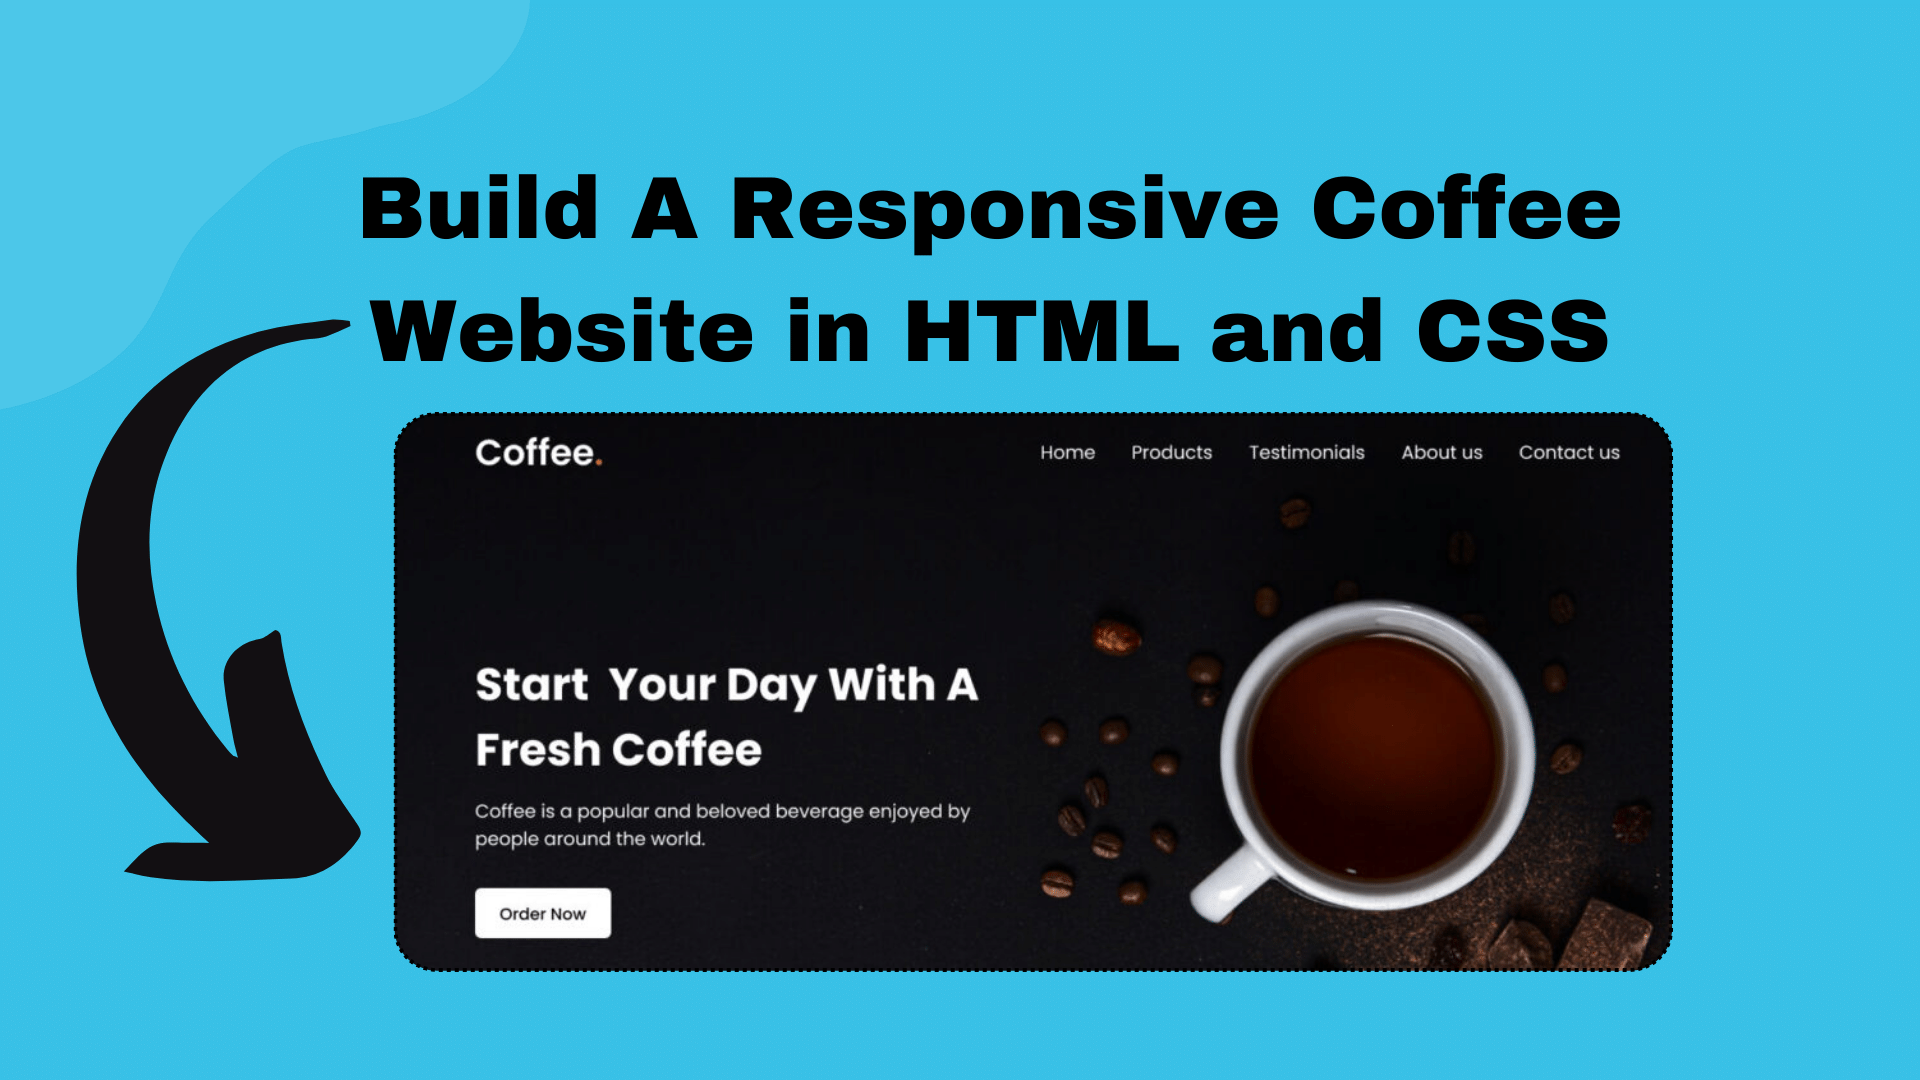 Build A Responsive Coffee Website in HTML and CSS